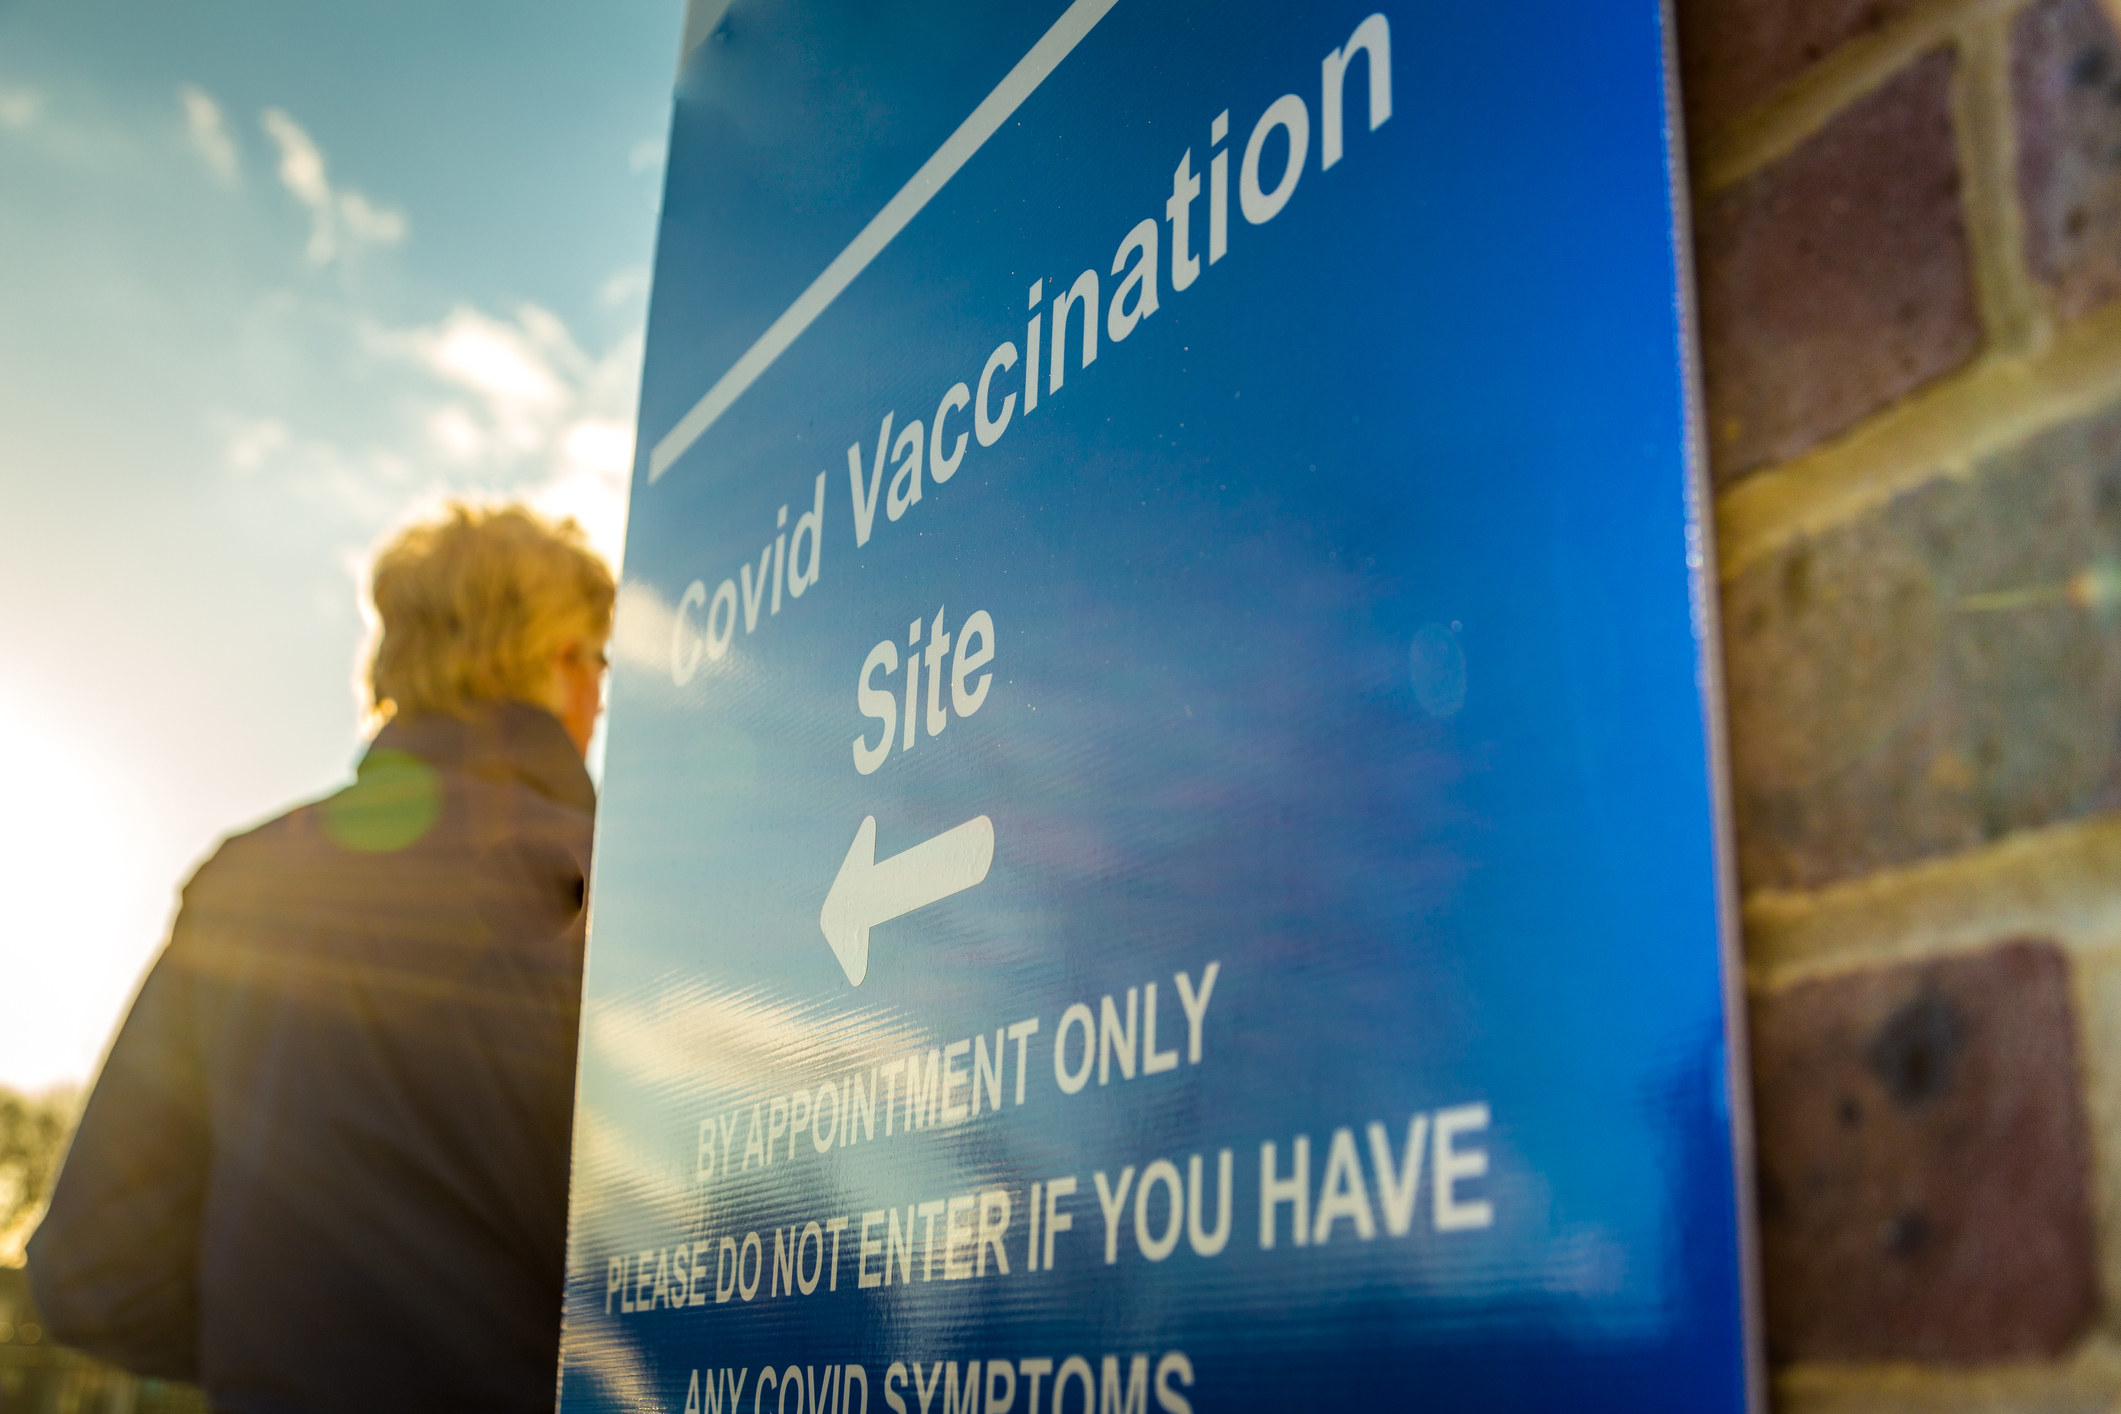 We see a sign pointing to a COVID-19 vaccination site